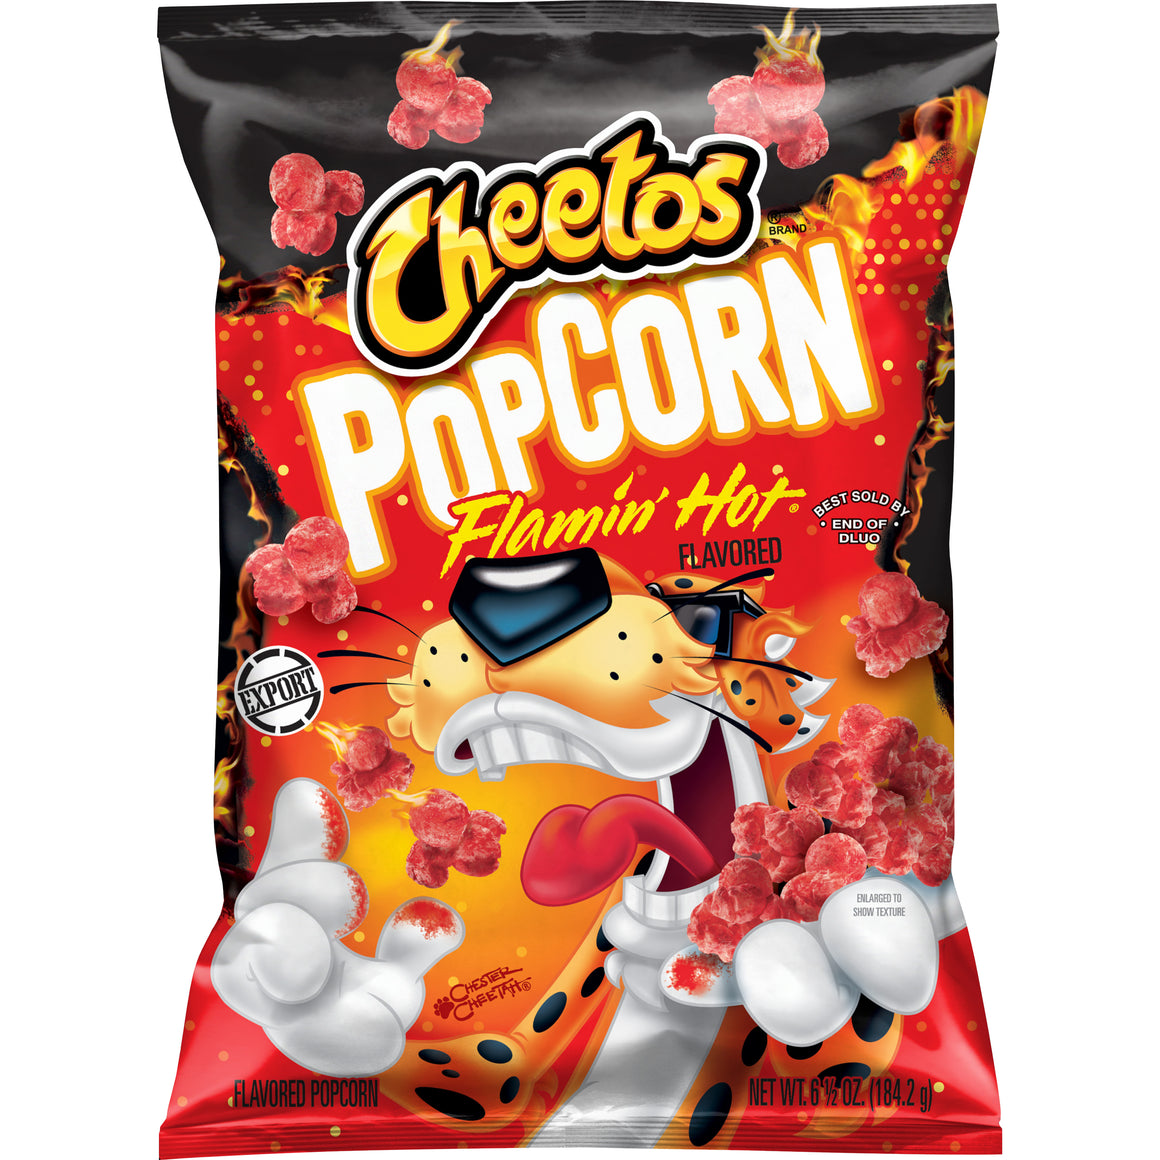 Cheetos Popcorn Flaming Hot Flavored Snack, 6.5 OZ (184g) - Export